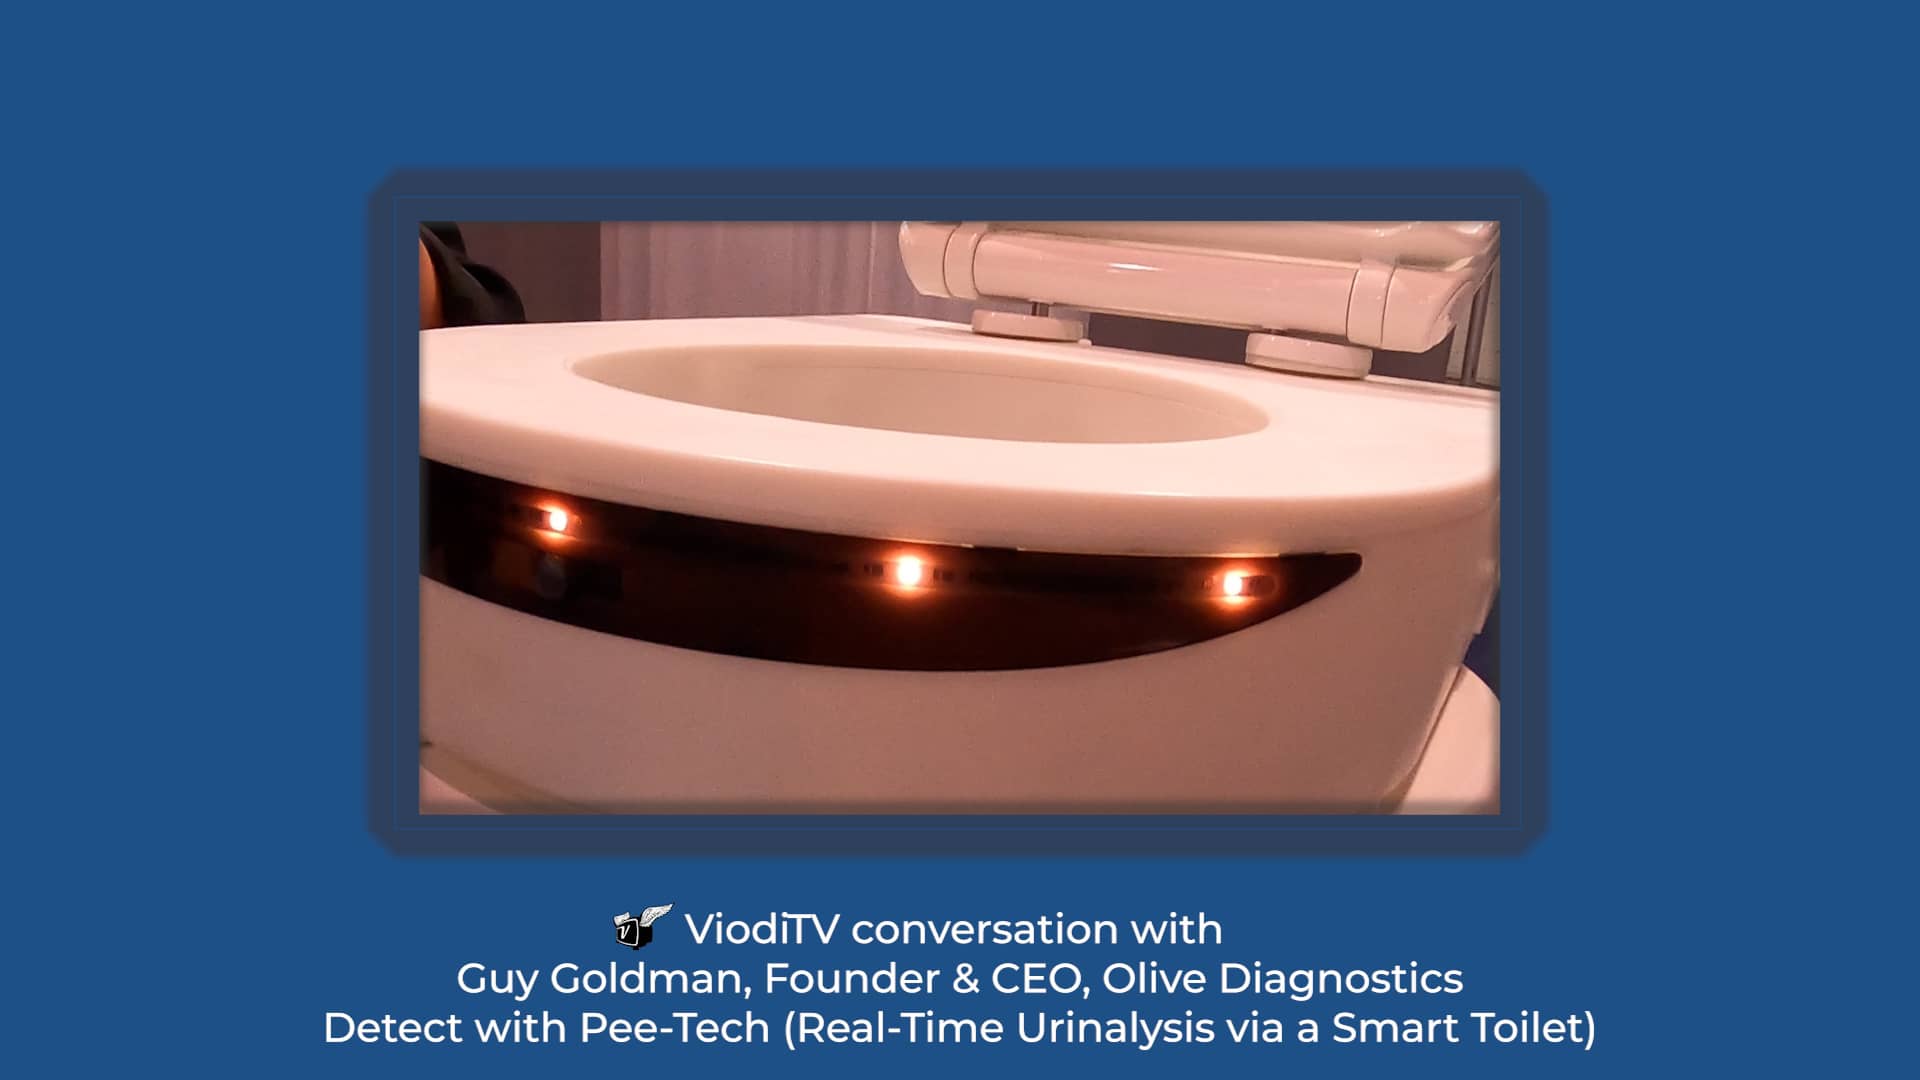 A smart toilet lid that analyzes urine for Urinary Tract Infections in real-time from Olive Diagnostics shown at CES2022.